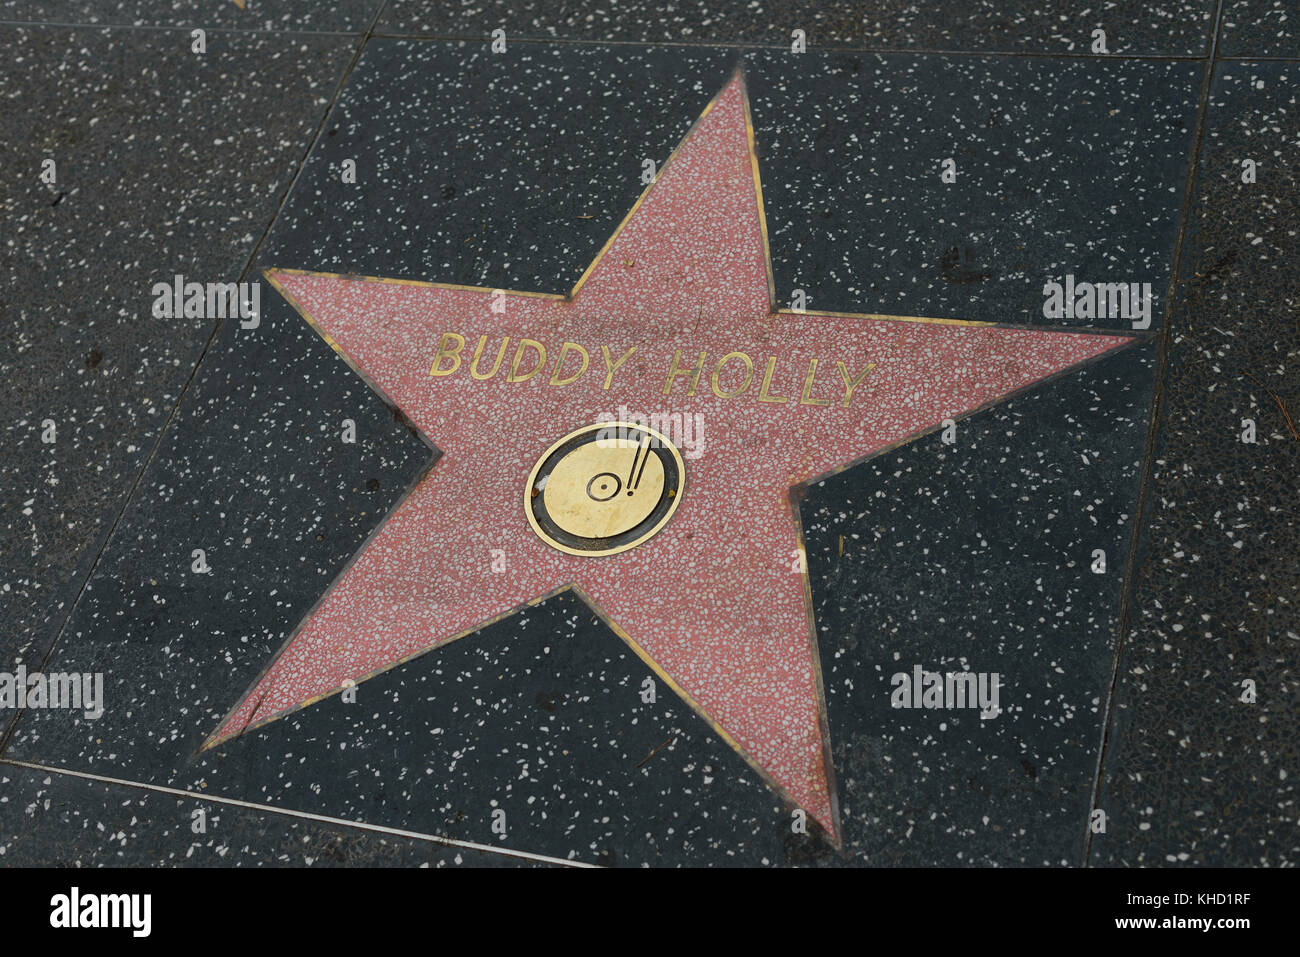 HOLLYWOOD, CA - DECEMBER 06: Buddy Holly star on the Hollywood Walk of Fame in Hollywood, California on Dec. 6, 2016. Stock Photo